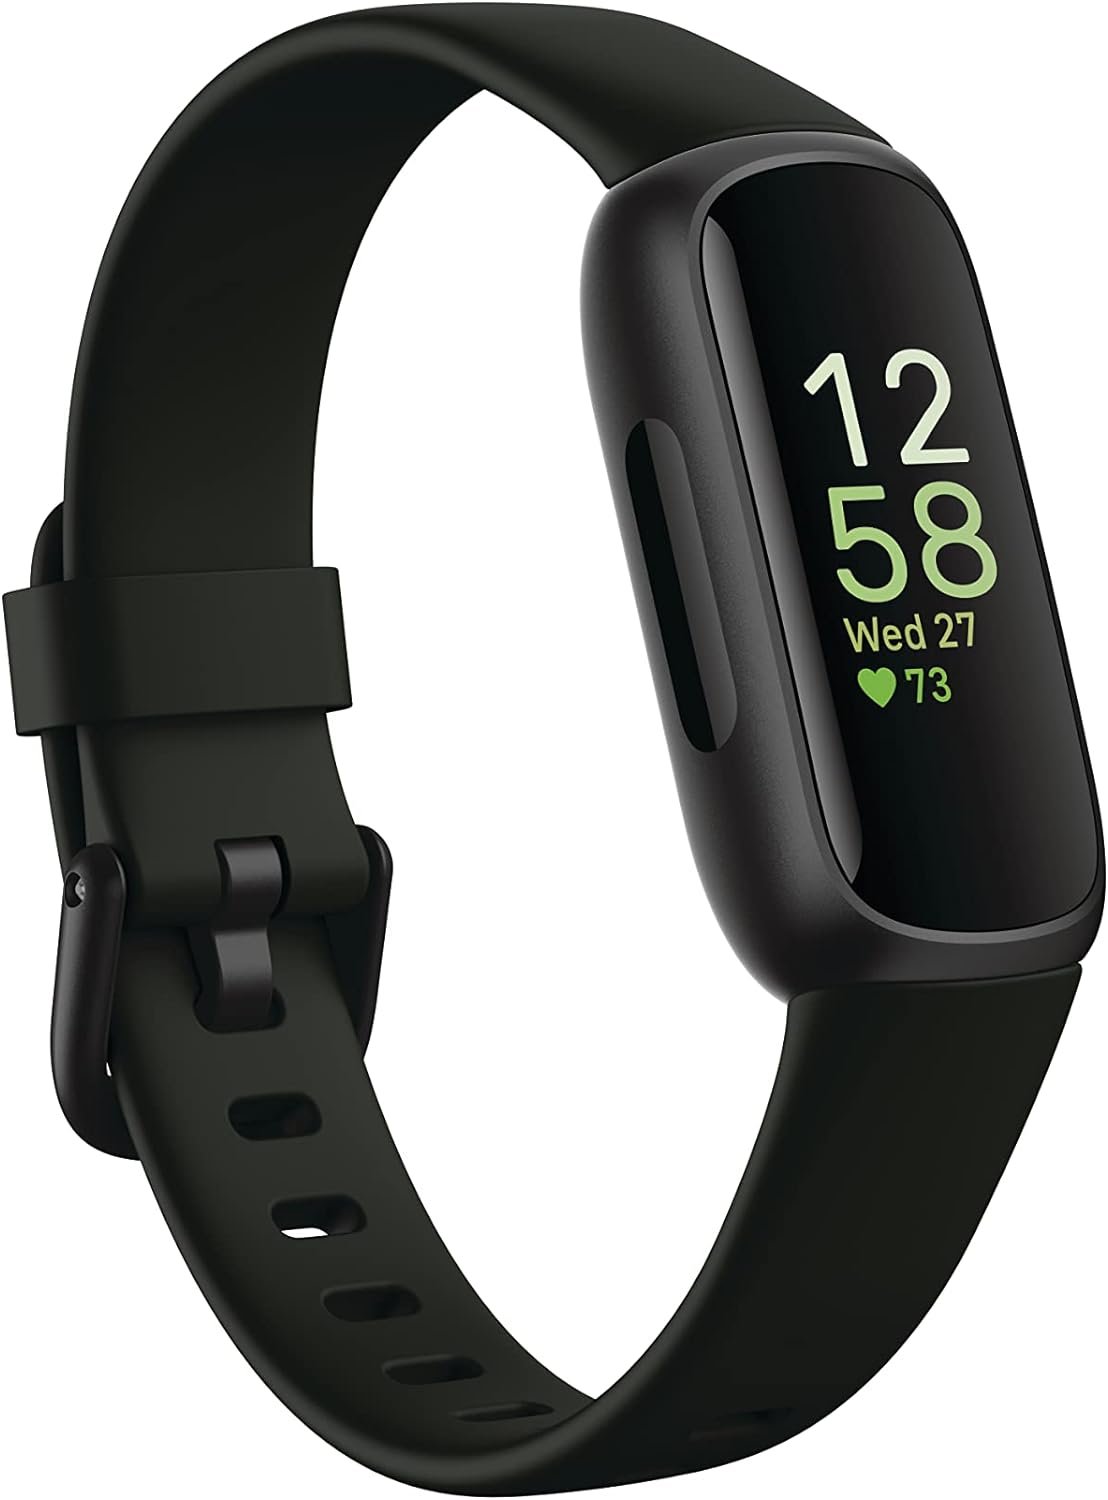 Fitbit Inspire 3, fitness tracker, activity tracking, sleep tracking, heart rate monitoring, stress management, long battery life, limited display, basic workouts, limited smart features, water resistant, Fitbit Premium.